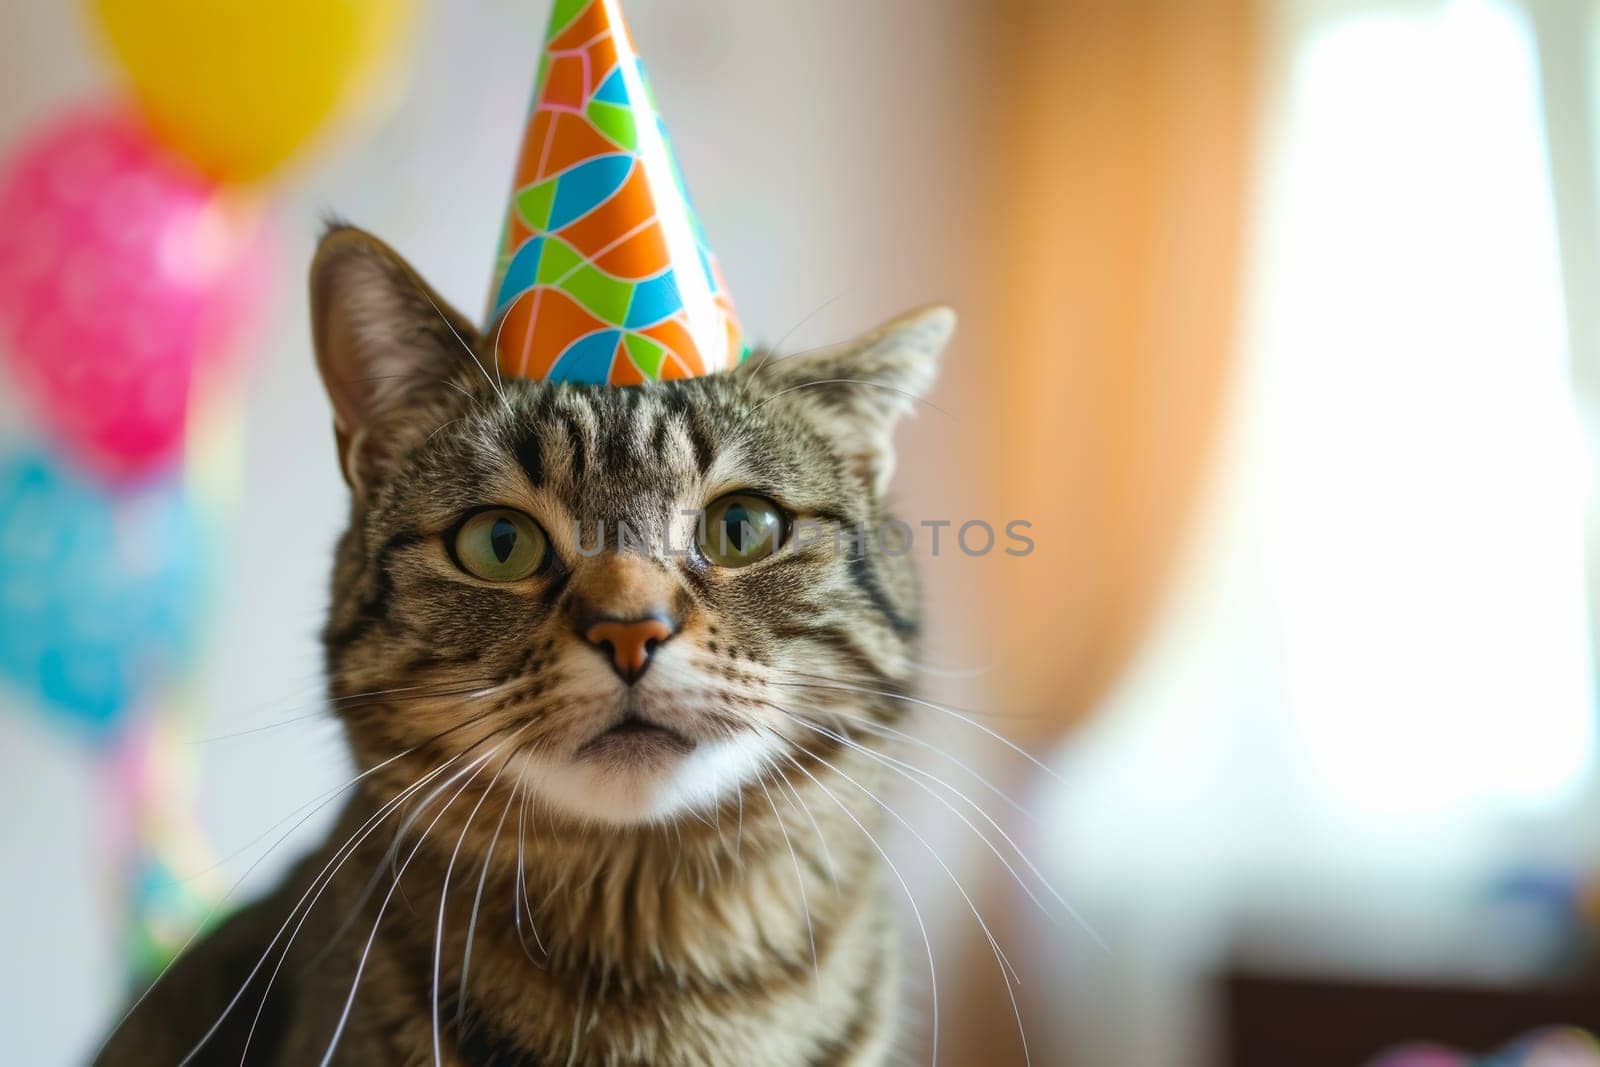 A cat wearing a party hat with colorful balloons in the background, creating a festive atmosphere.